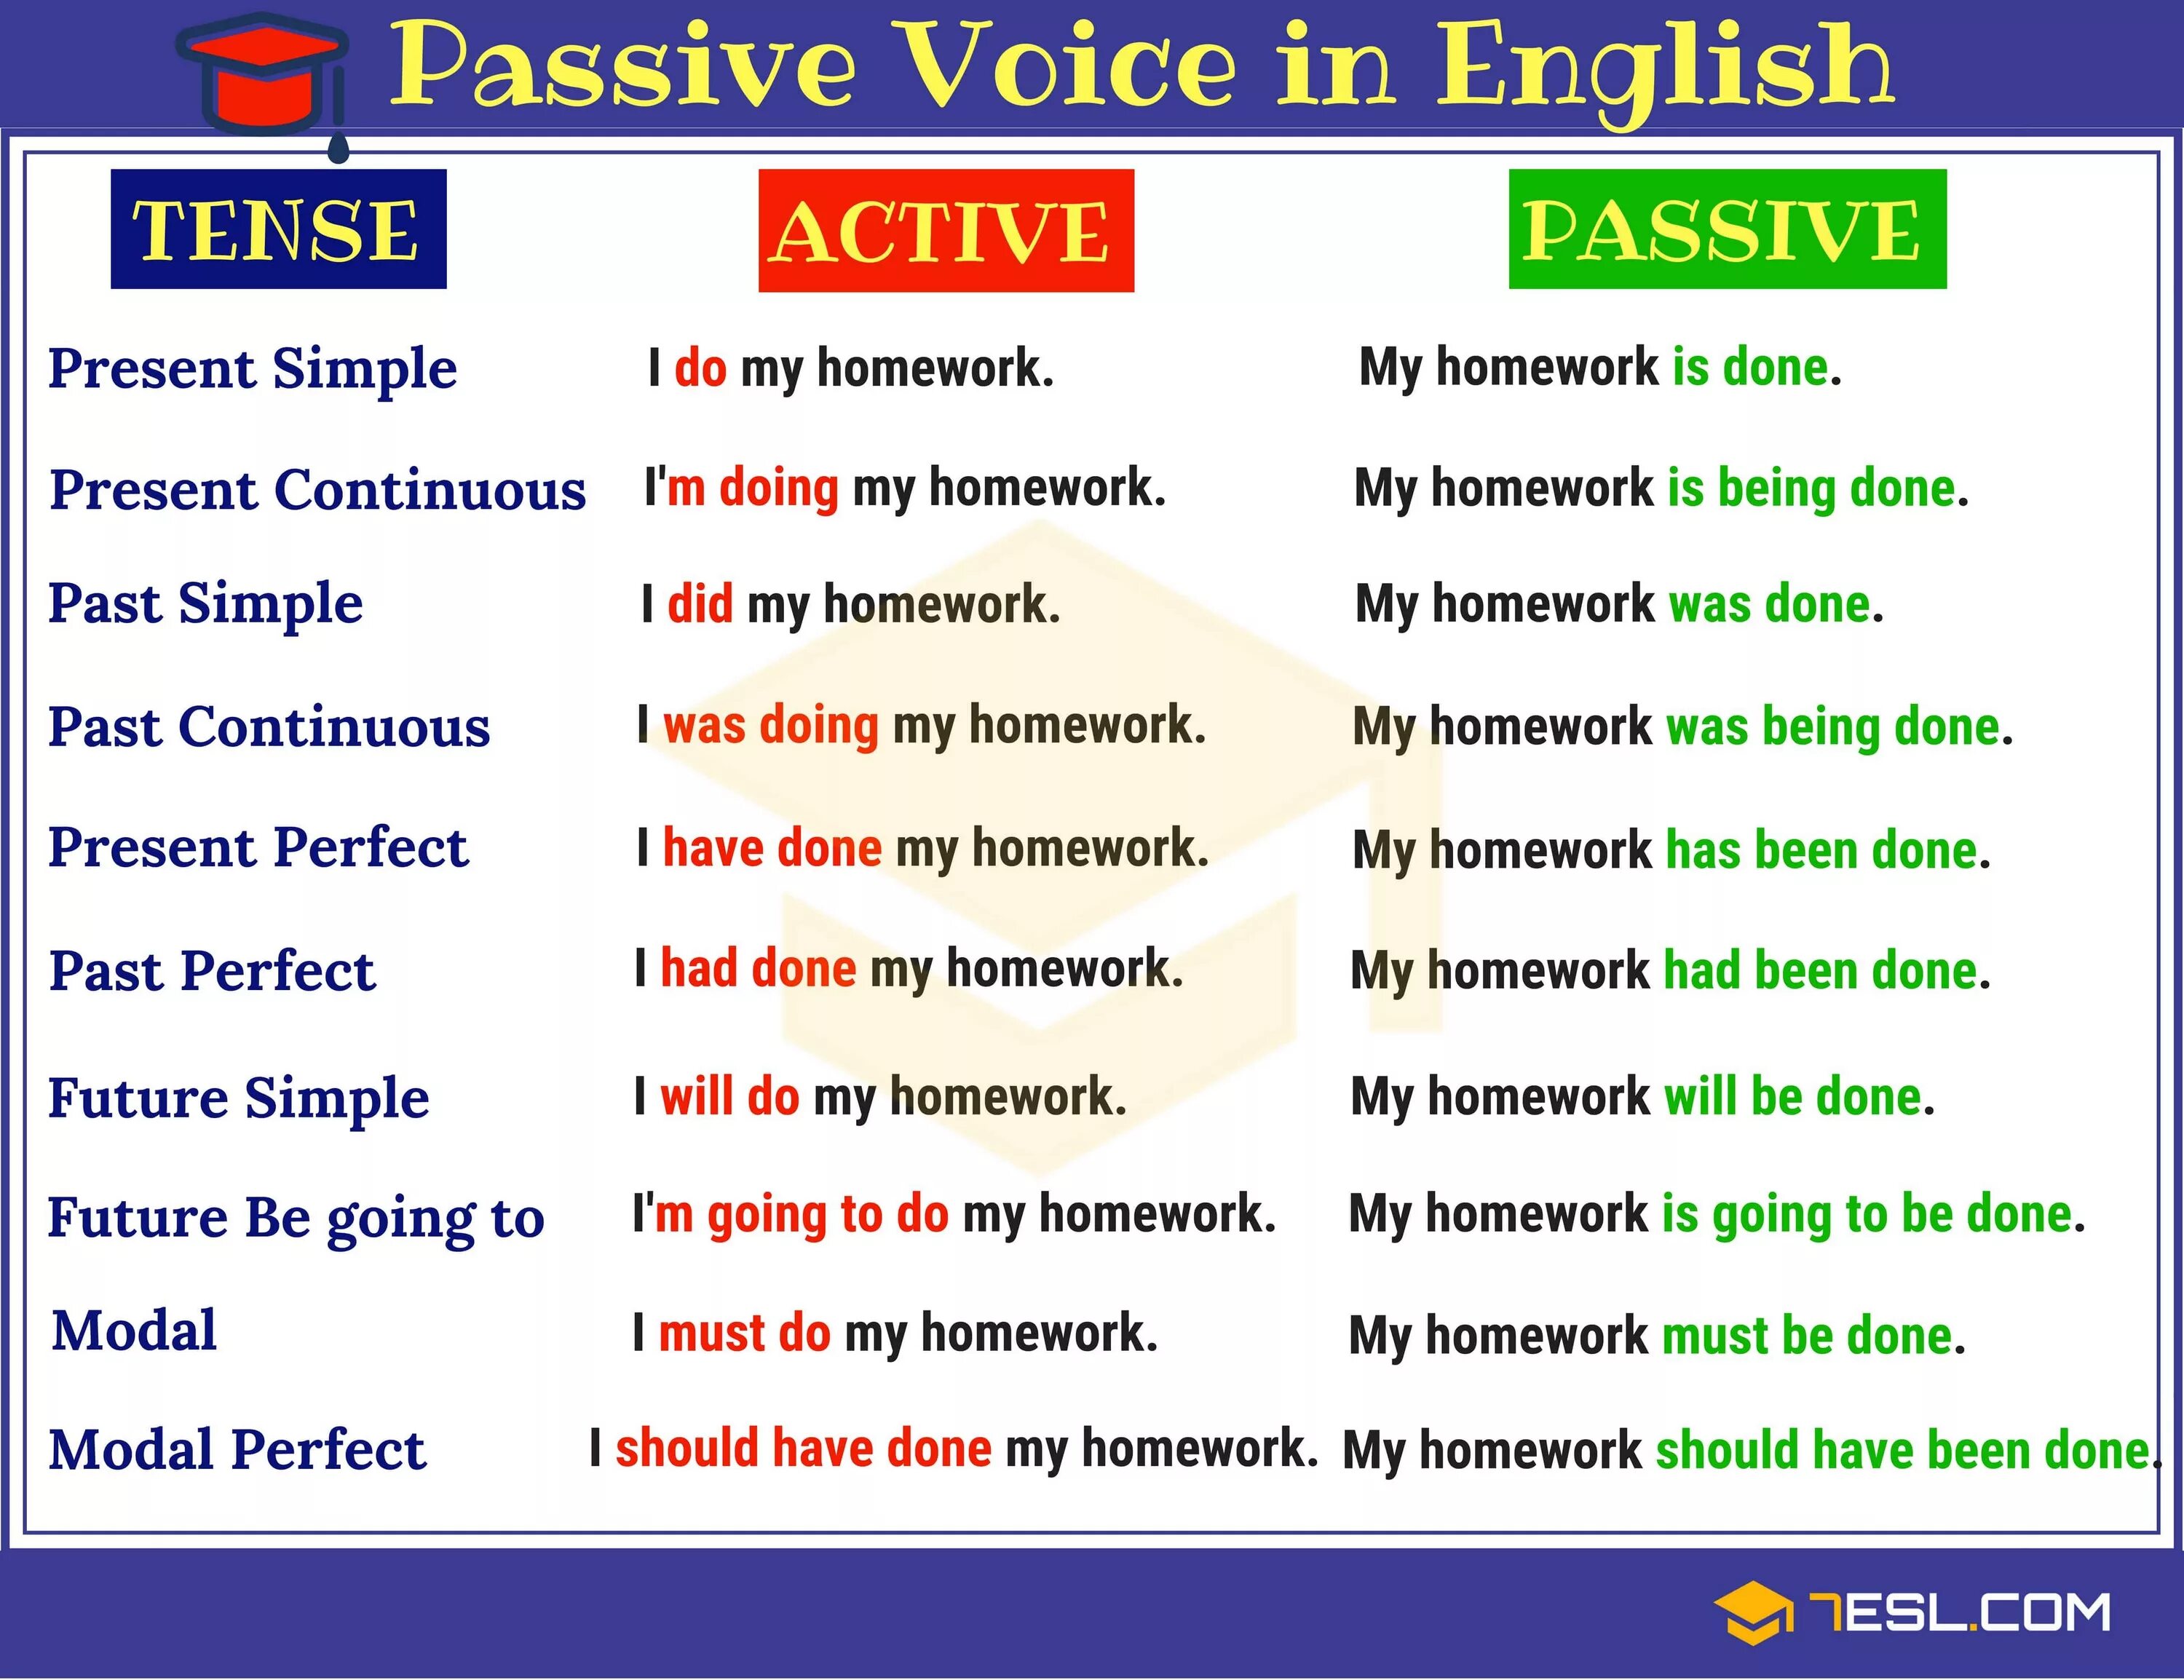 Active and Passive Voice in English Grammar. Active and Passive Voice грамматика. English Tenses Active and Passive. English Tenses Passive Voice. Actions rules